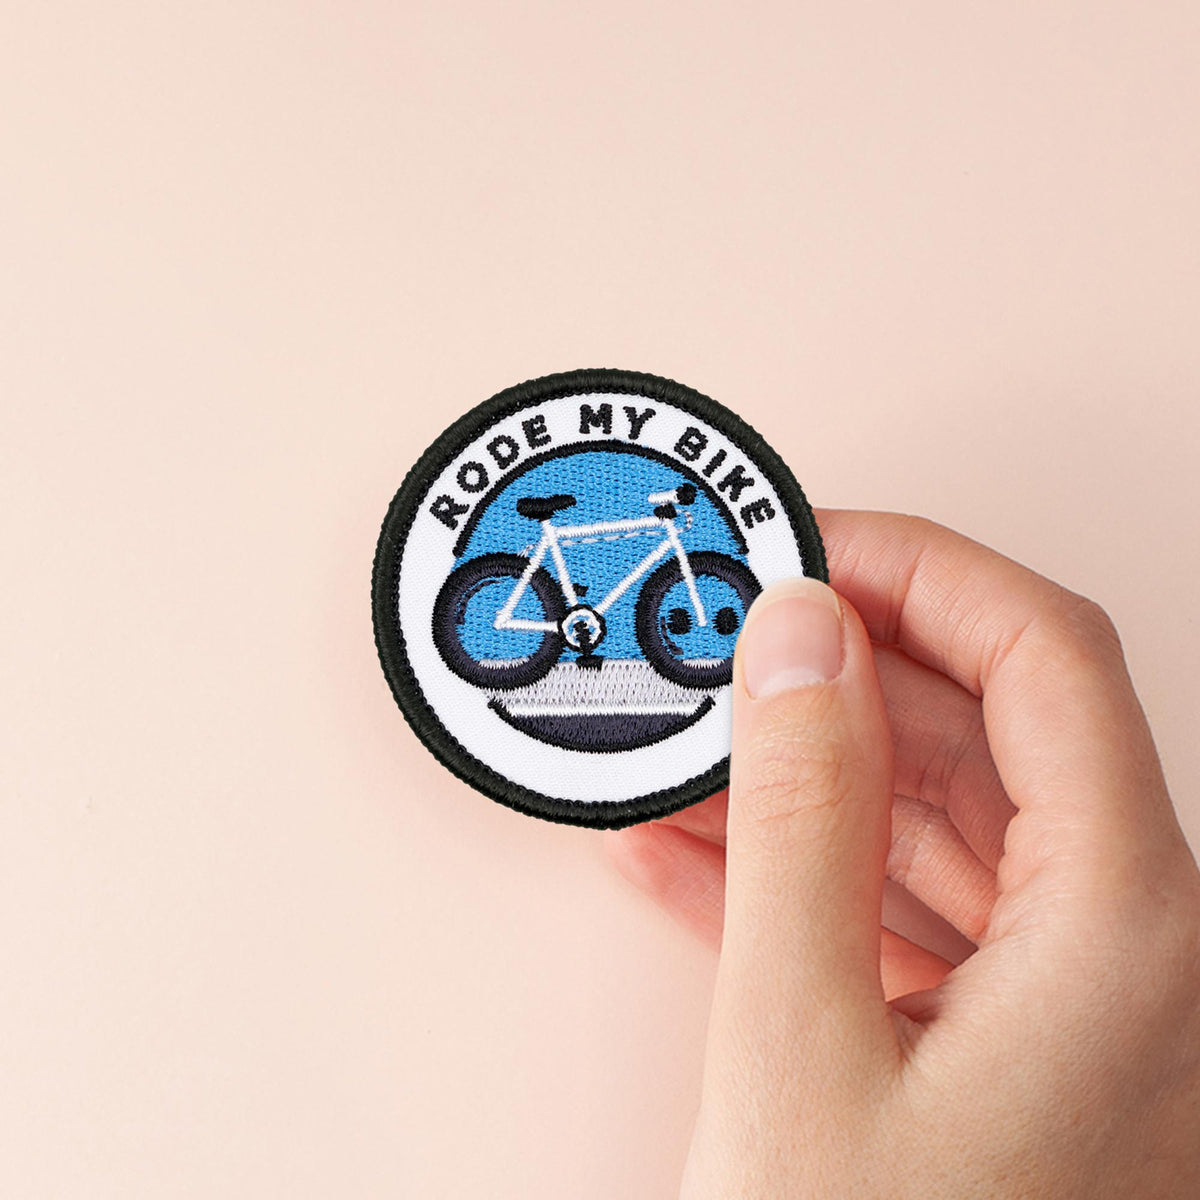 Rode My Bike individual adulting merit badge patch for adults